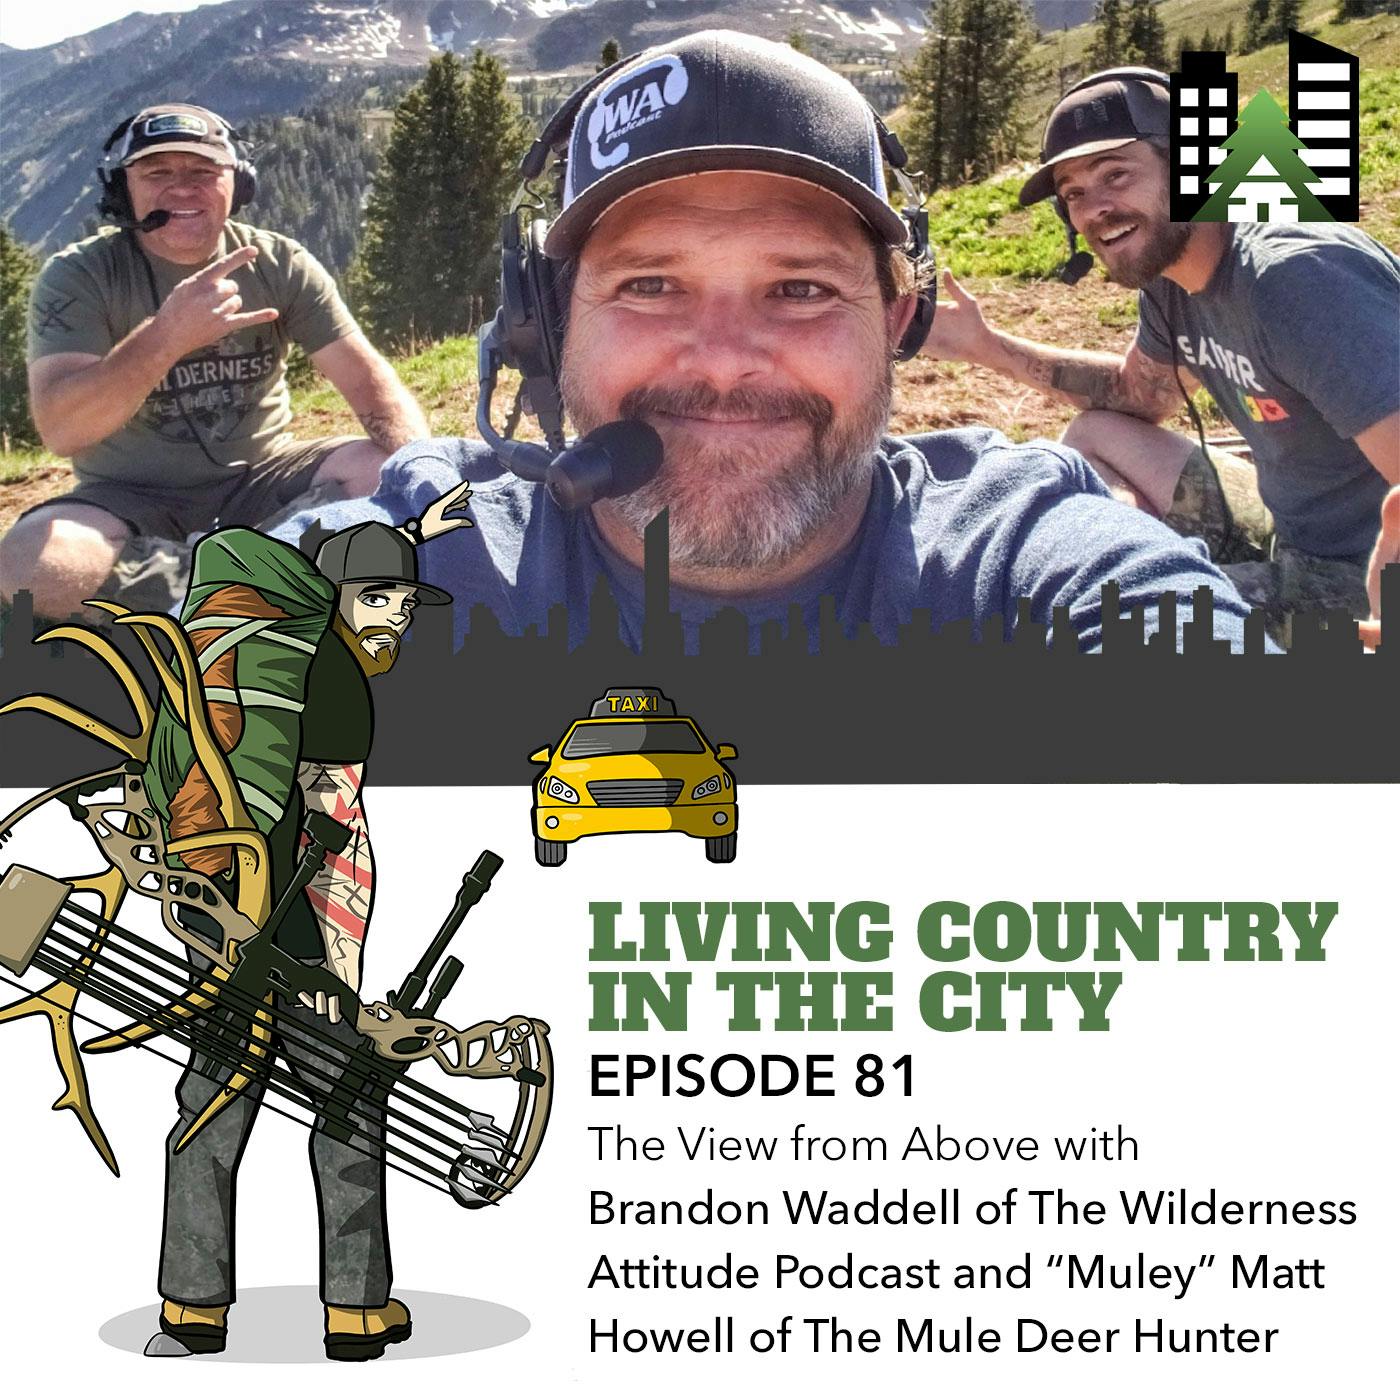 Ep 81 - The View from Above with Brandon Waddell of The Wilderness Attitude Podcast and “Muley” Matt Howell of The Mule Deer Hunter